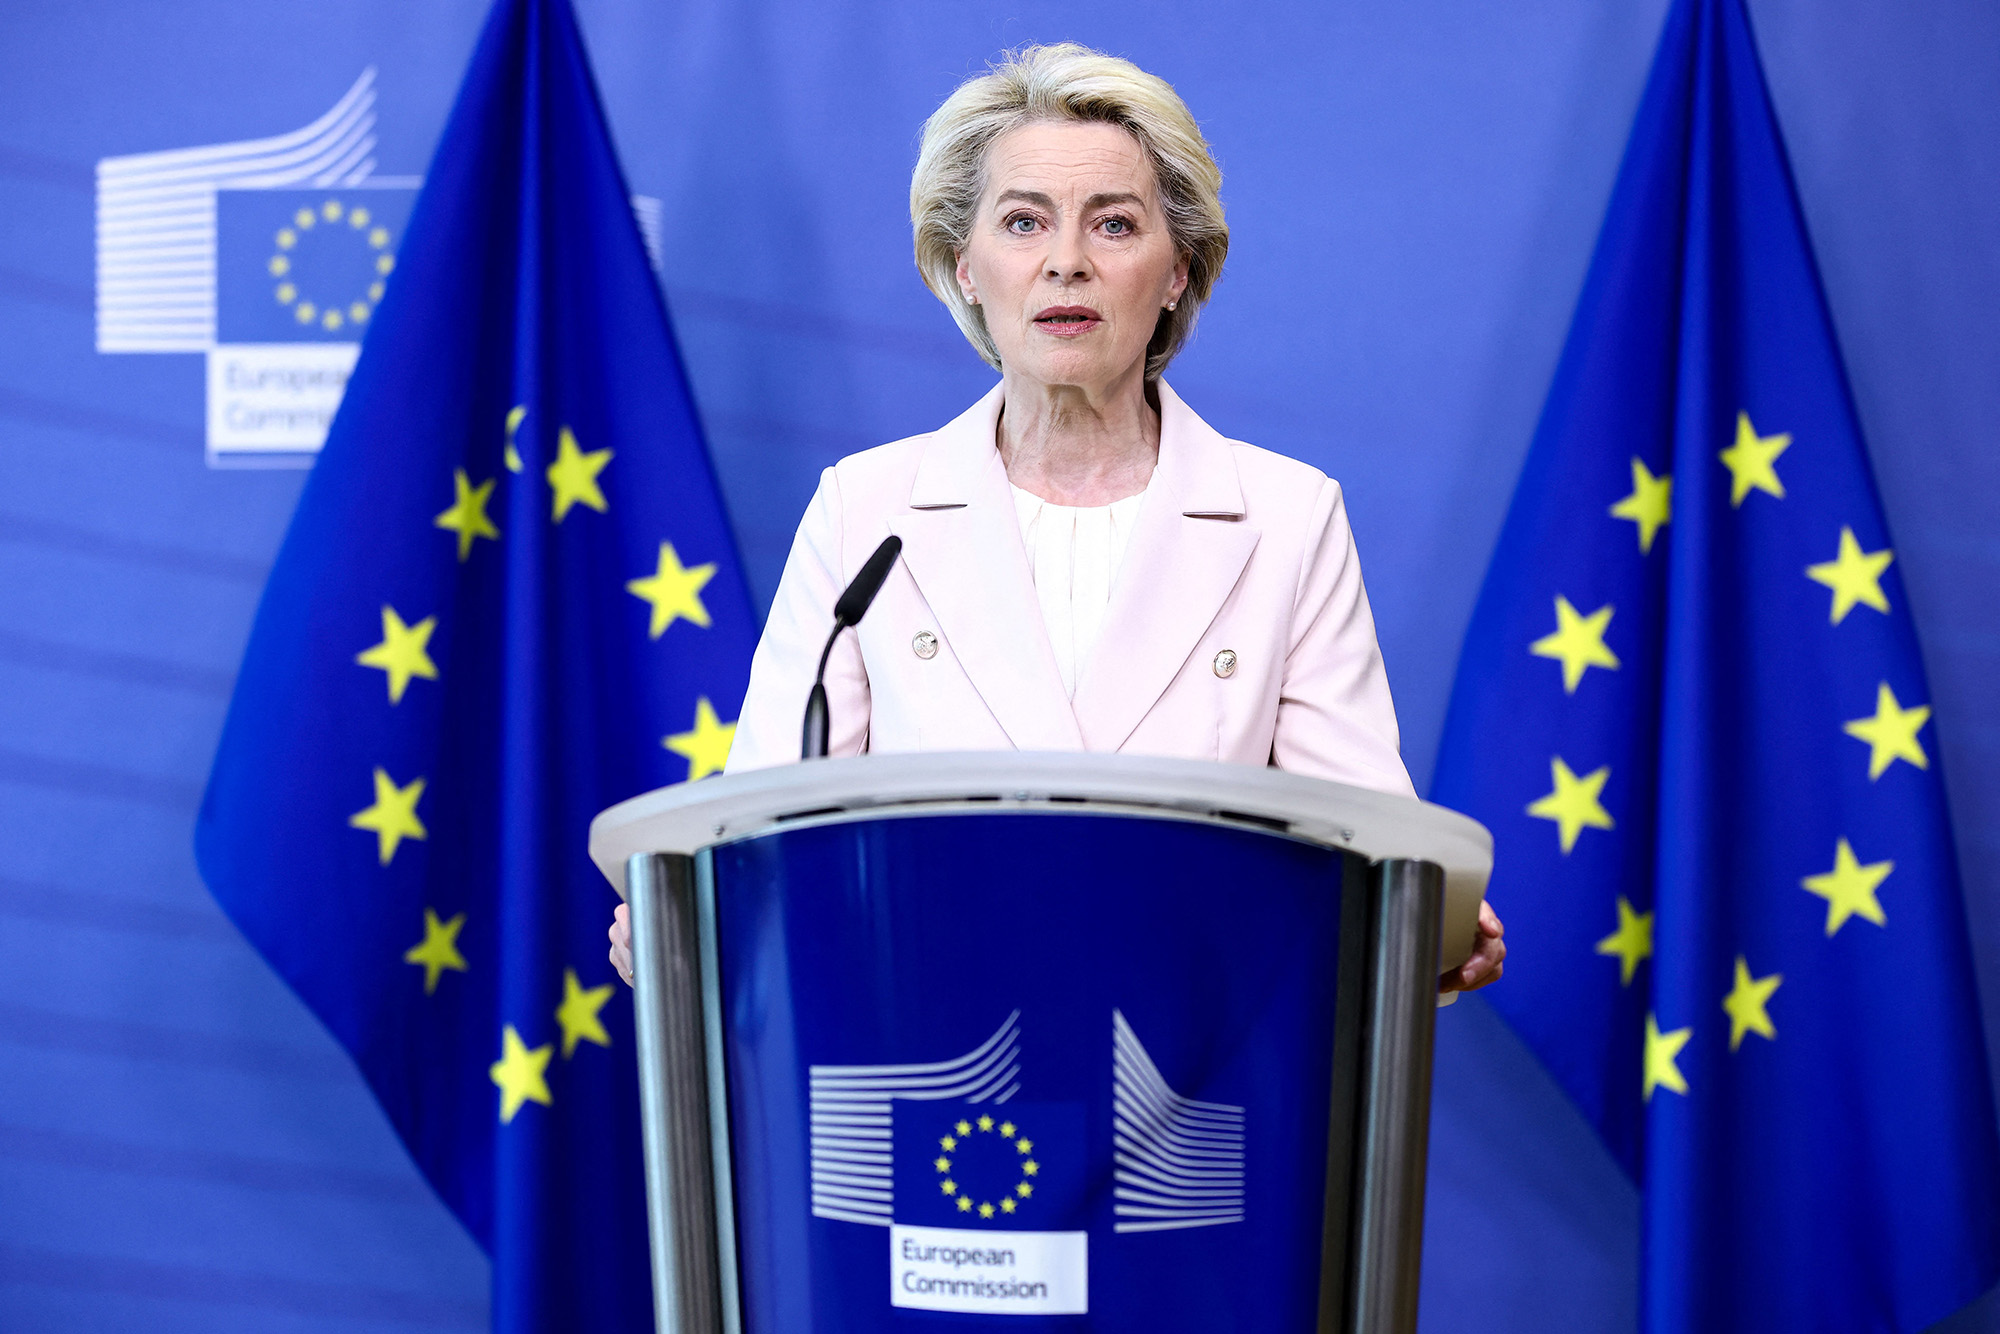 European Commission President Ursula von der Leyen makes a statement in Brussels, Belgium, on April 27, following the decision by Russian energy giant Gazprom to halt gas shipments to Poland and Bulgaria.